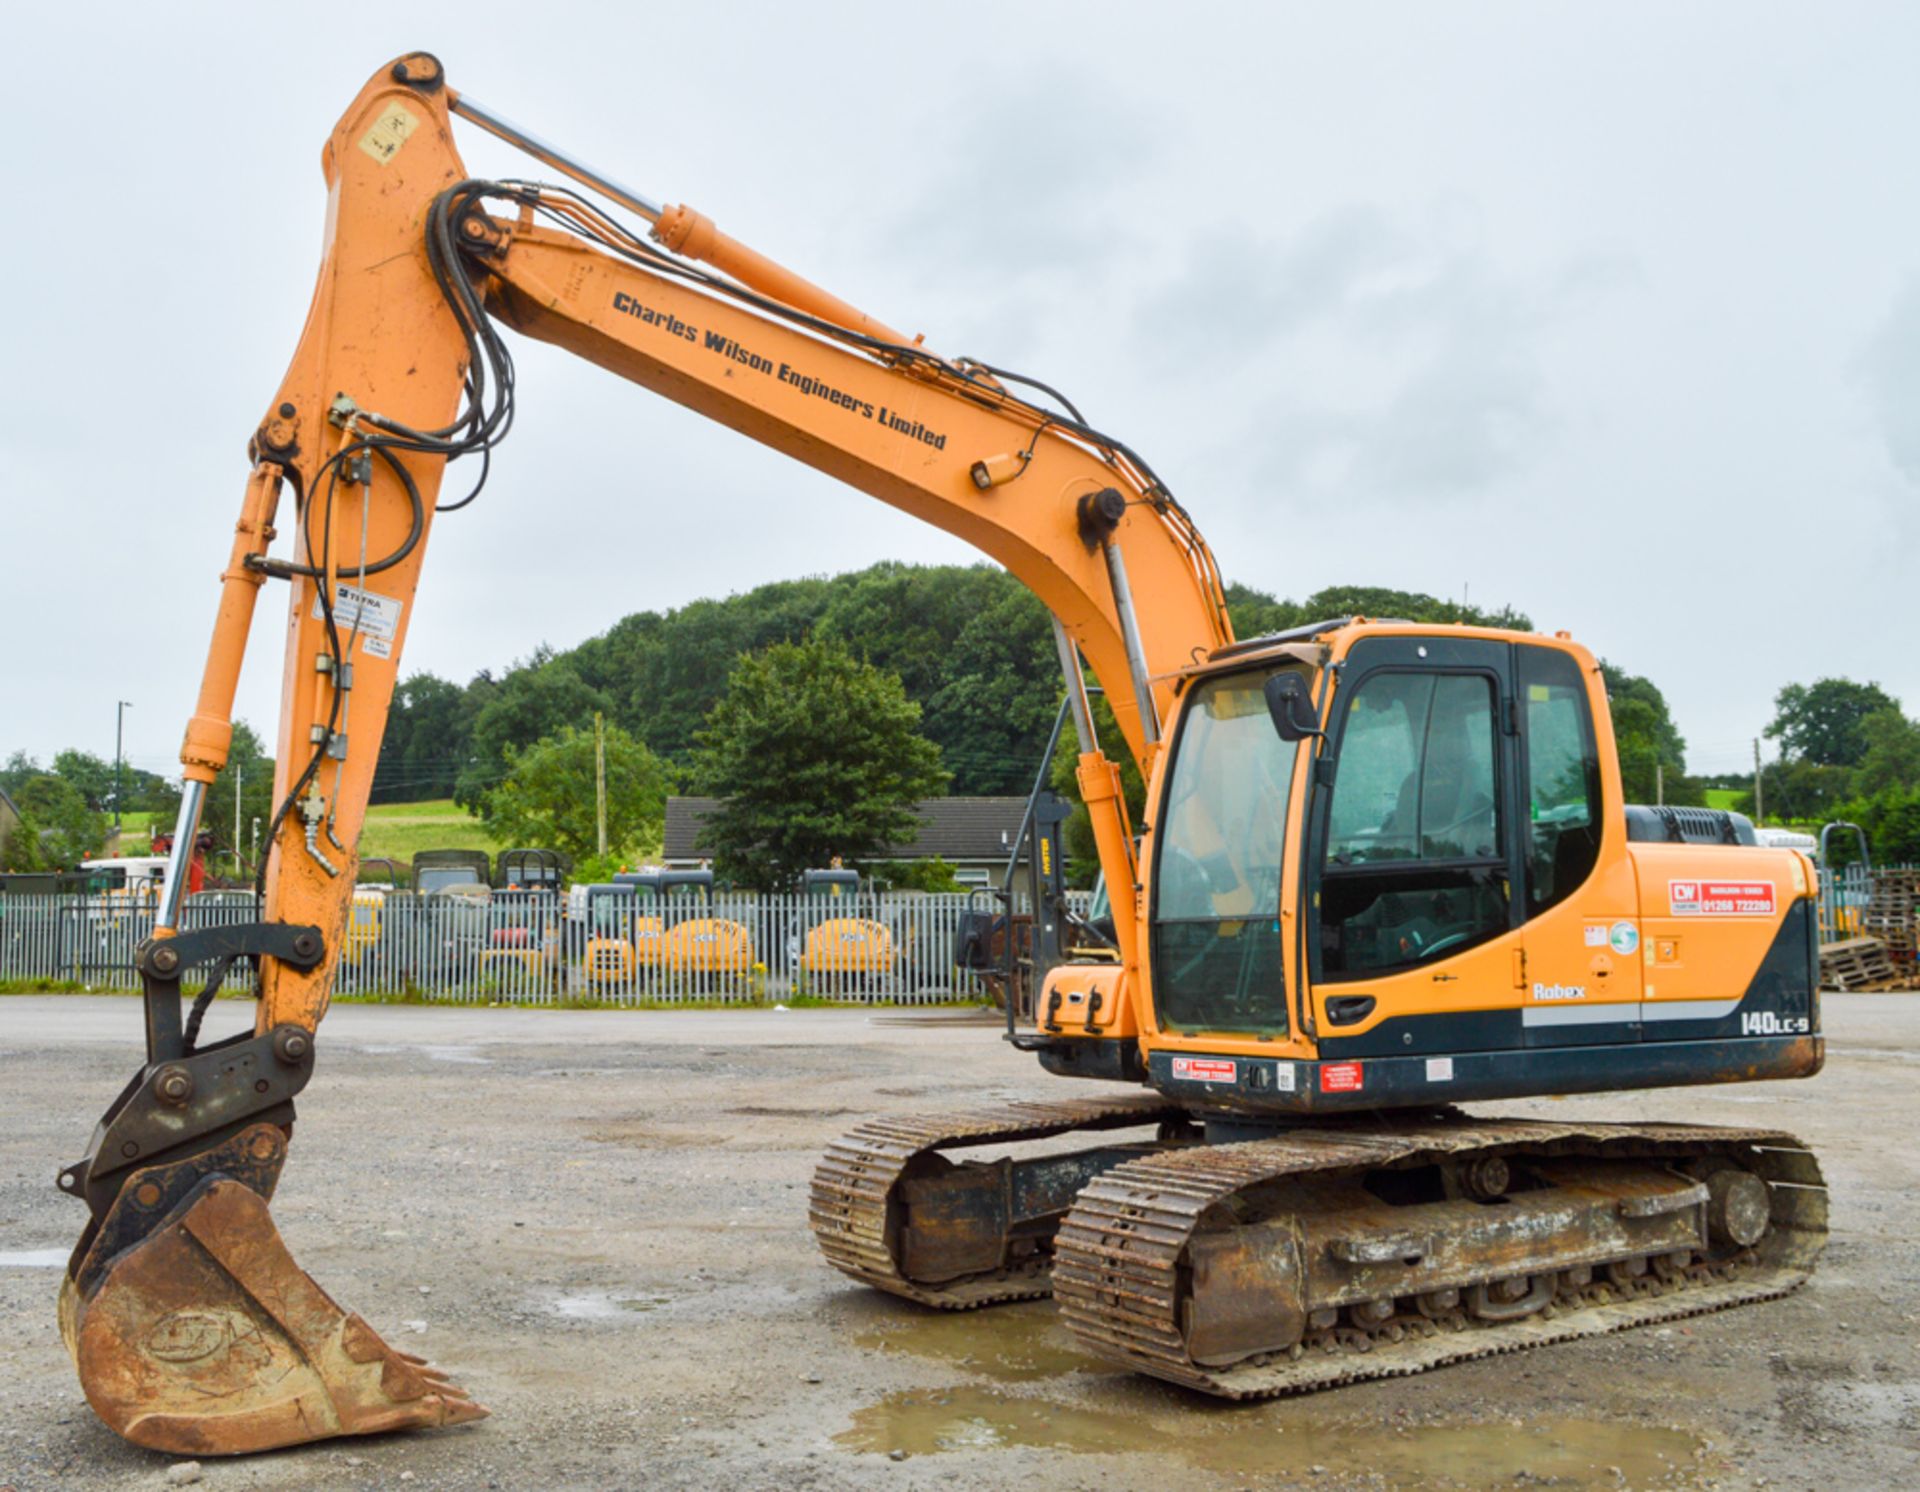 Hyundai Robex 140 LC-9 14 tonne steel tracked excavator Year: 2013 S/N: 0000625 Recorded Hours: 2980